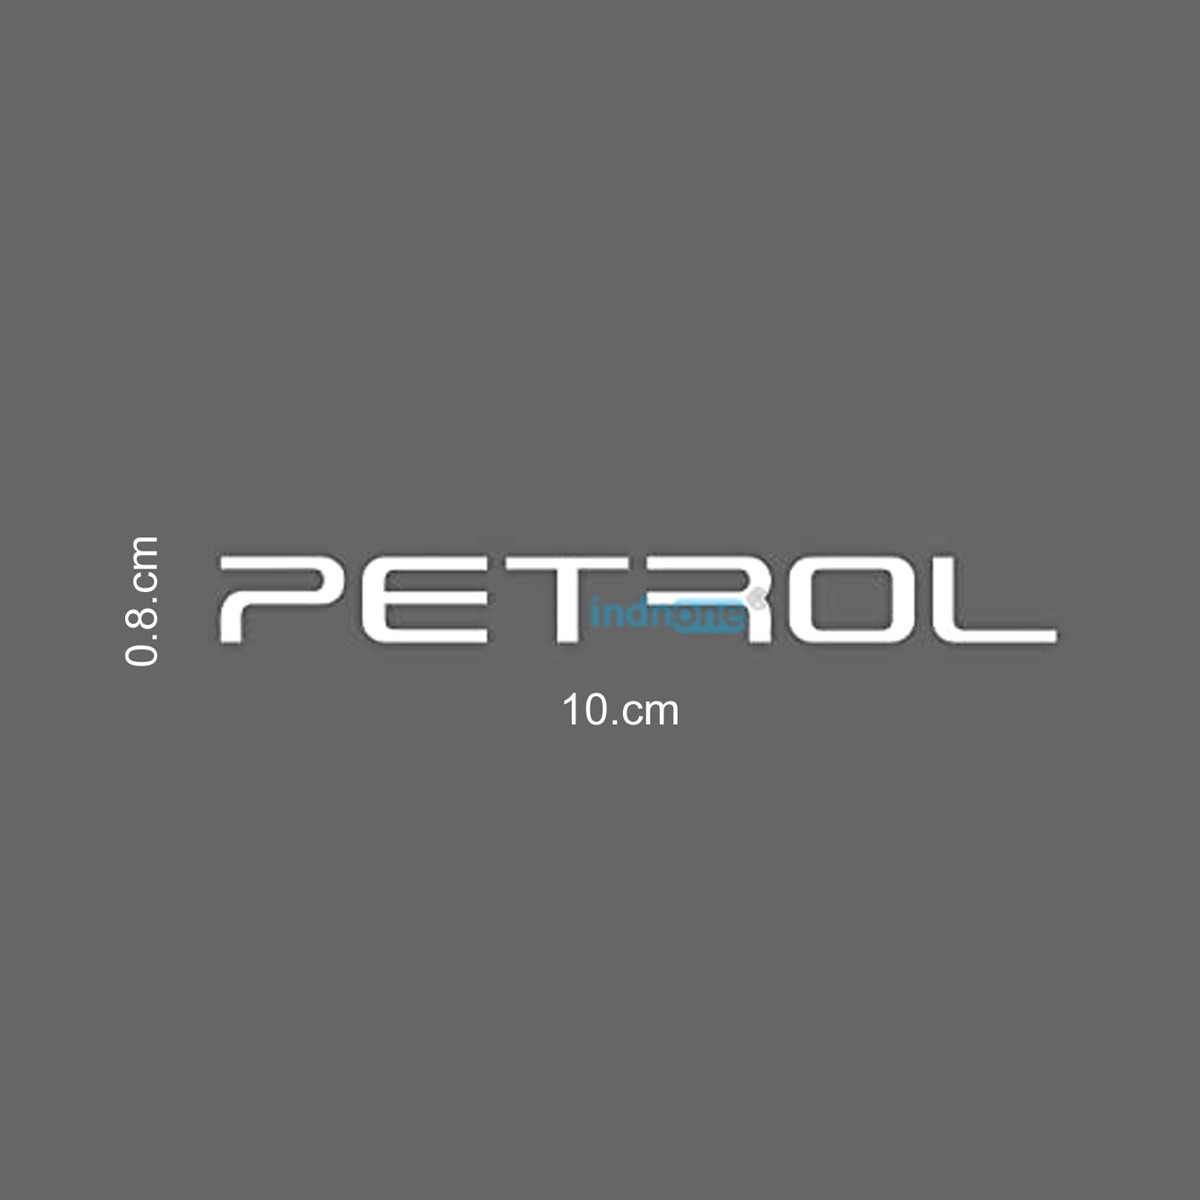 SIGN EVER Petrol Inside Logo Stickers for Car Sides Bumper Hood Window L x  H 12.00 cm x 10.00 cm Pack of 2 : Amazon.in: Car & Motorbike